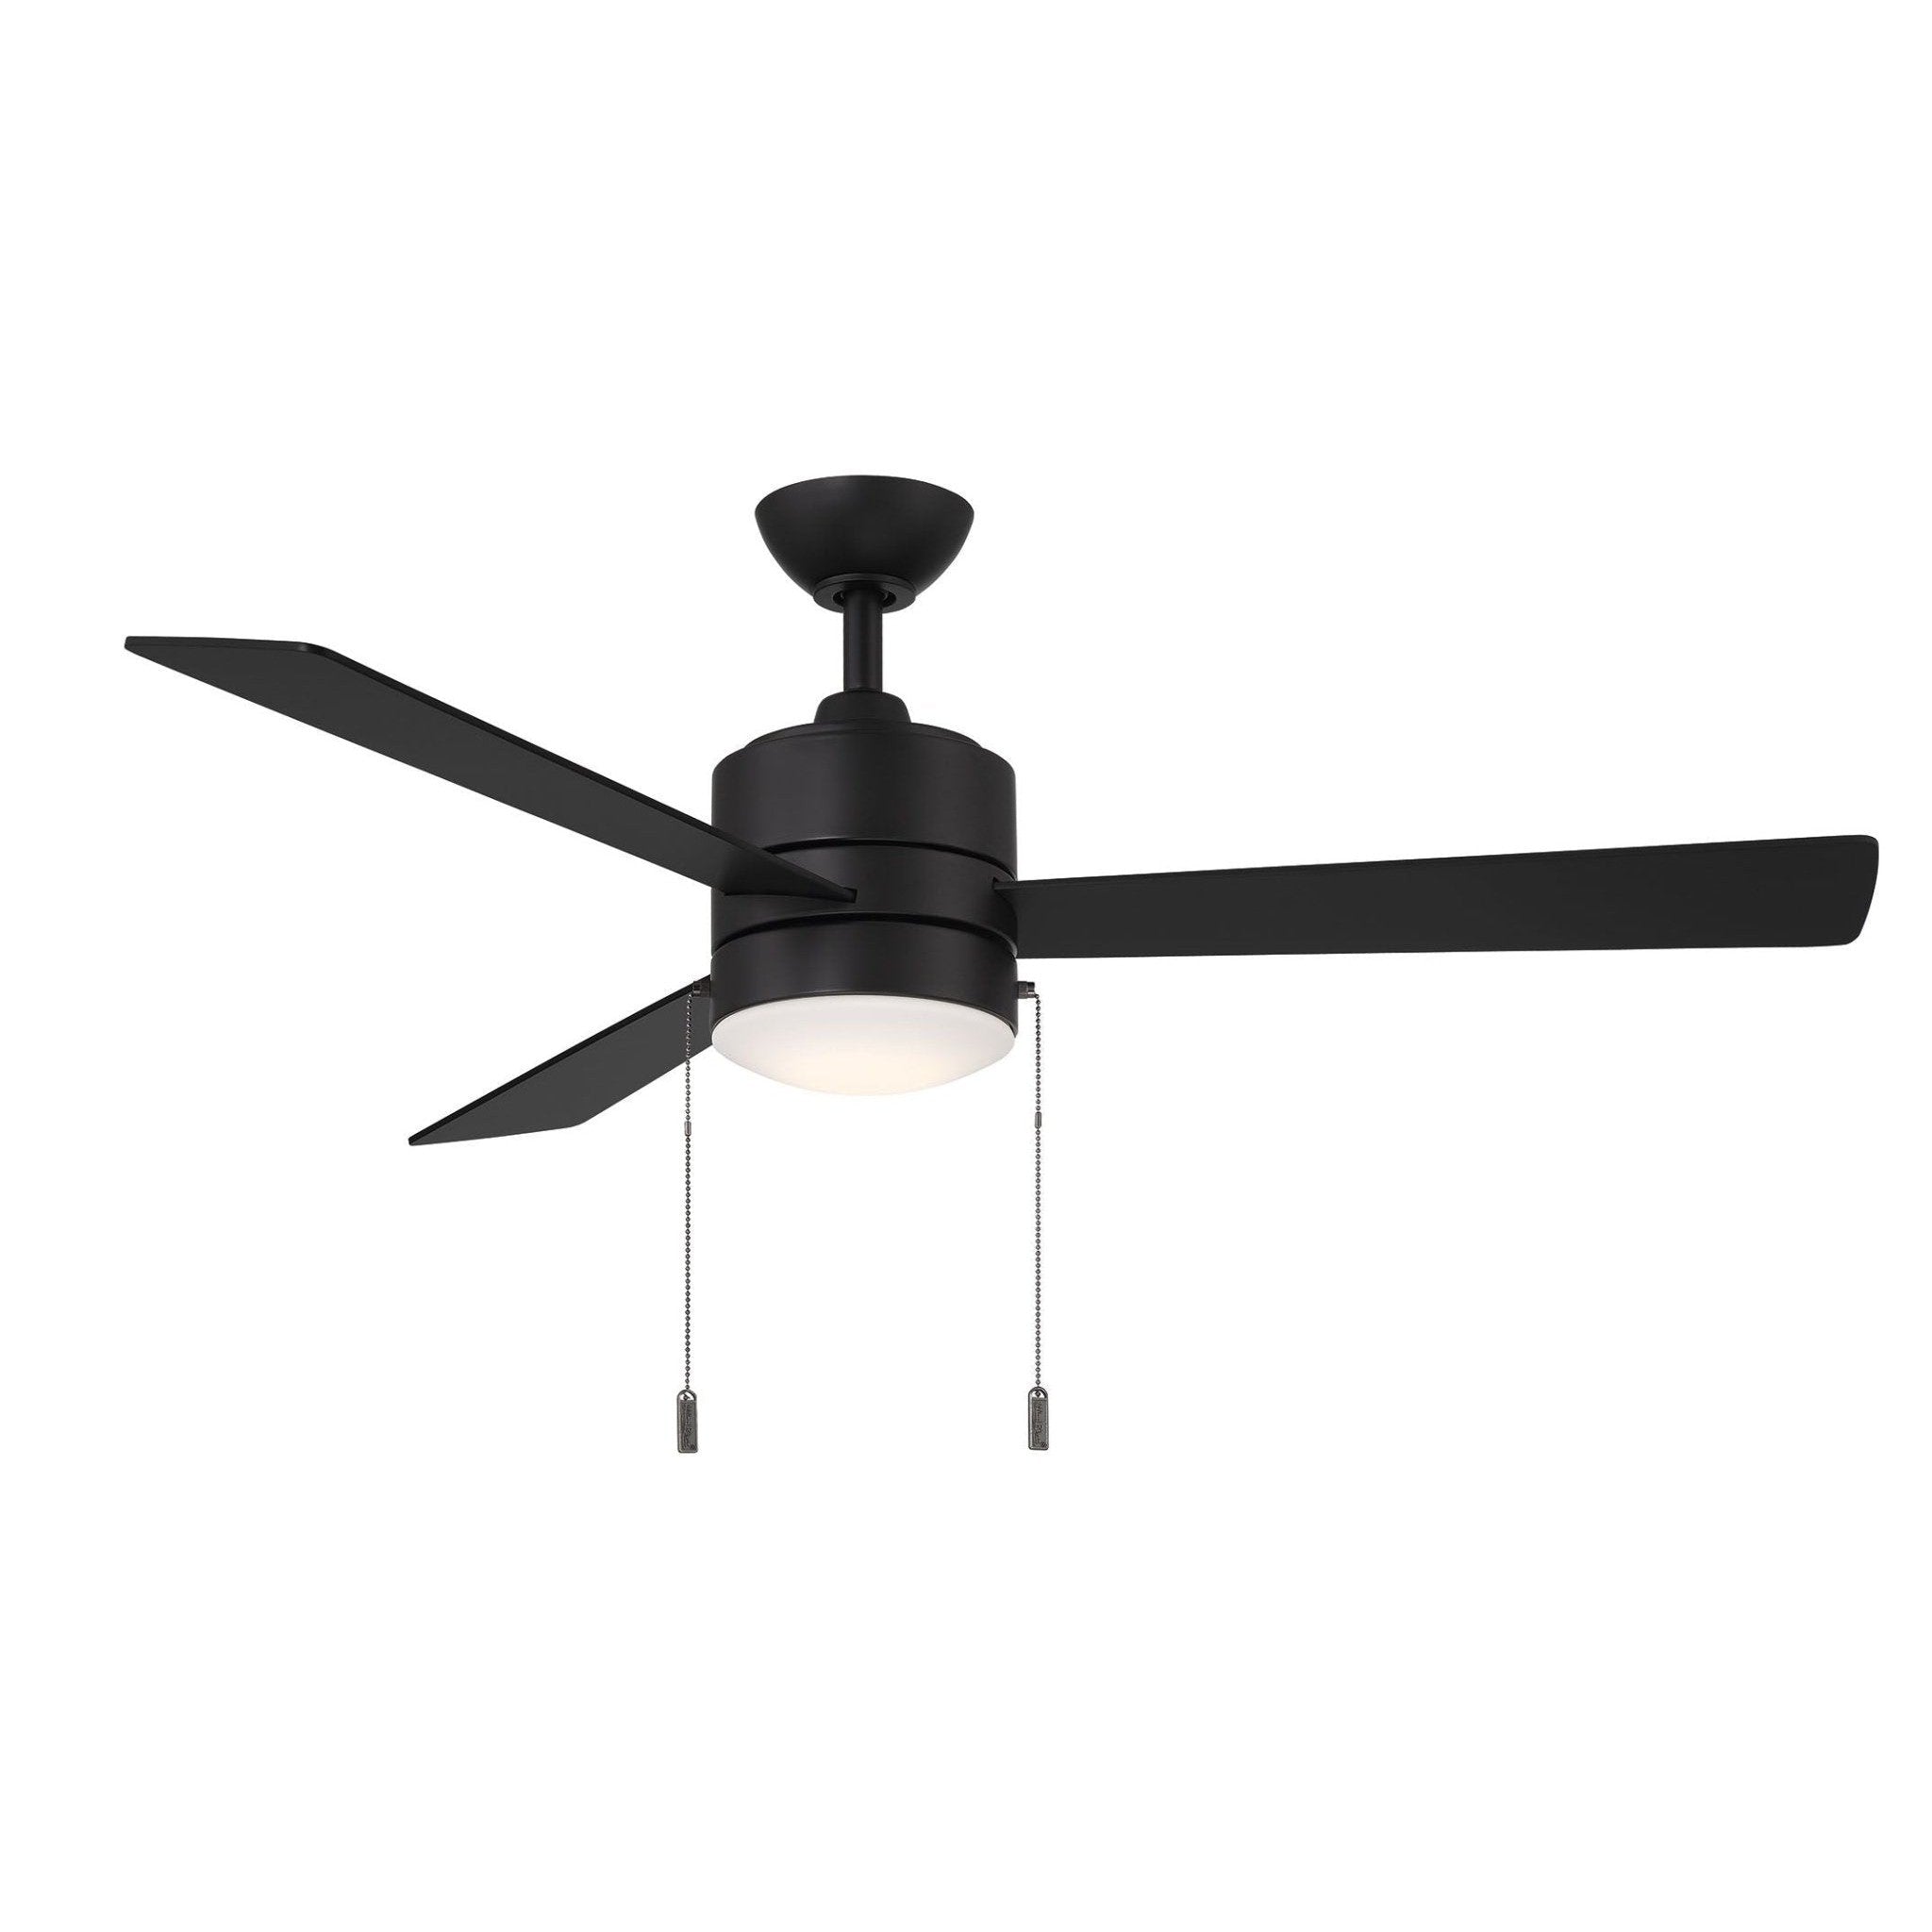 Wind River Ryan 52" Energy Star Pull Chain Ceiling Fan - Image 1